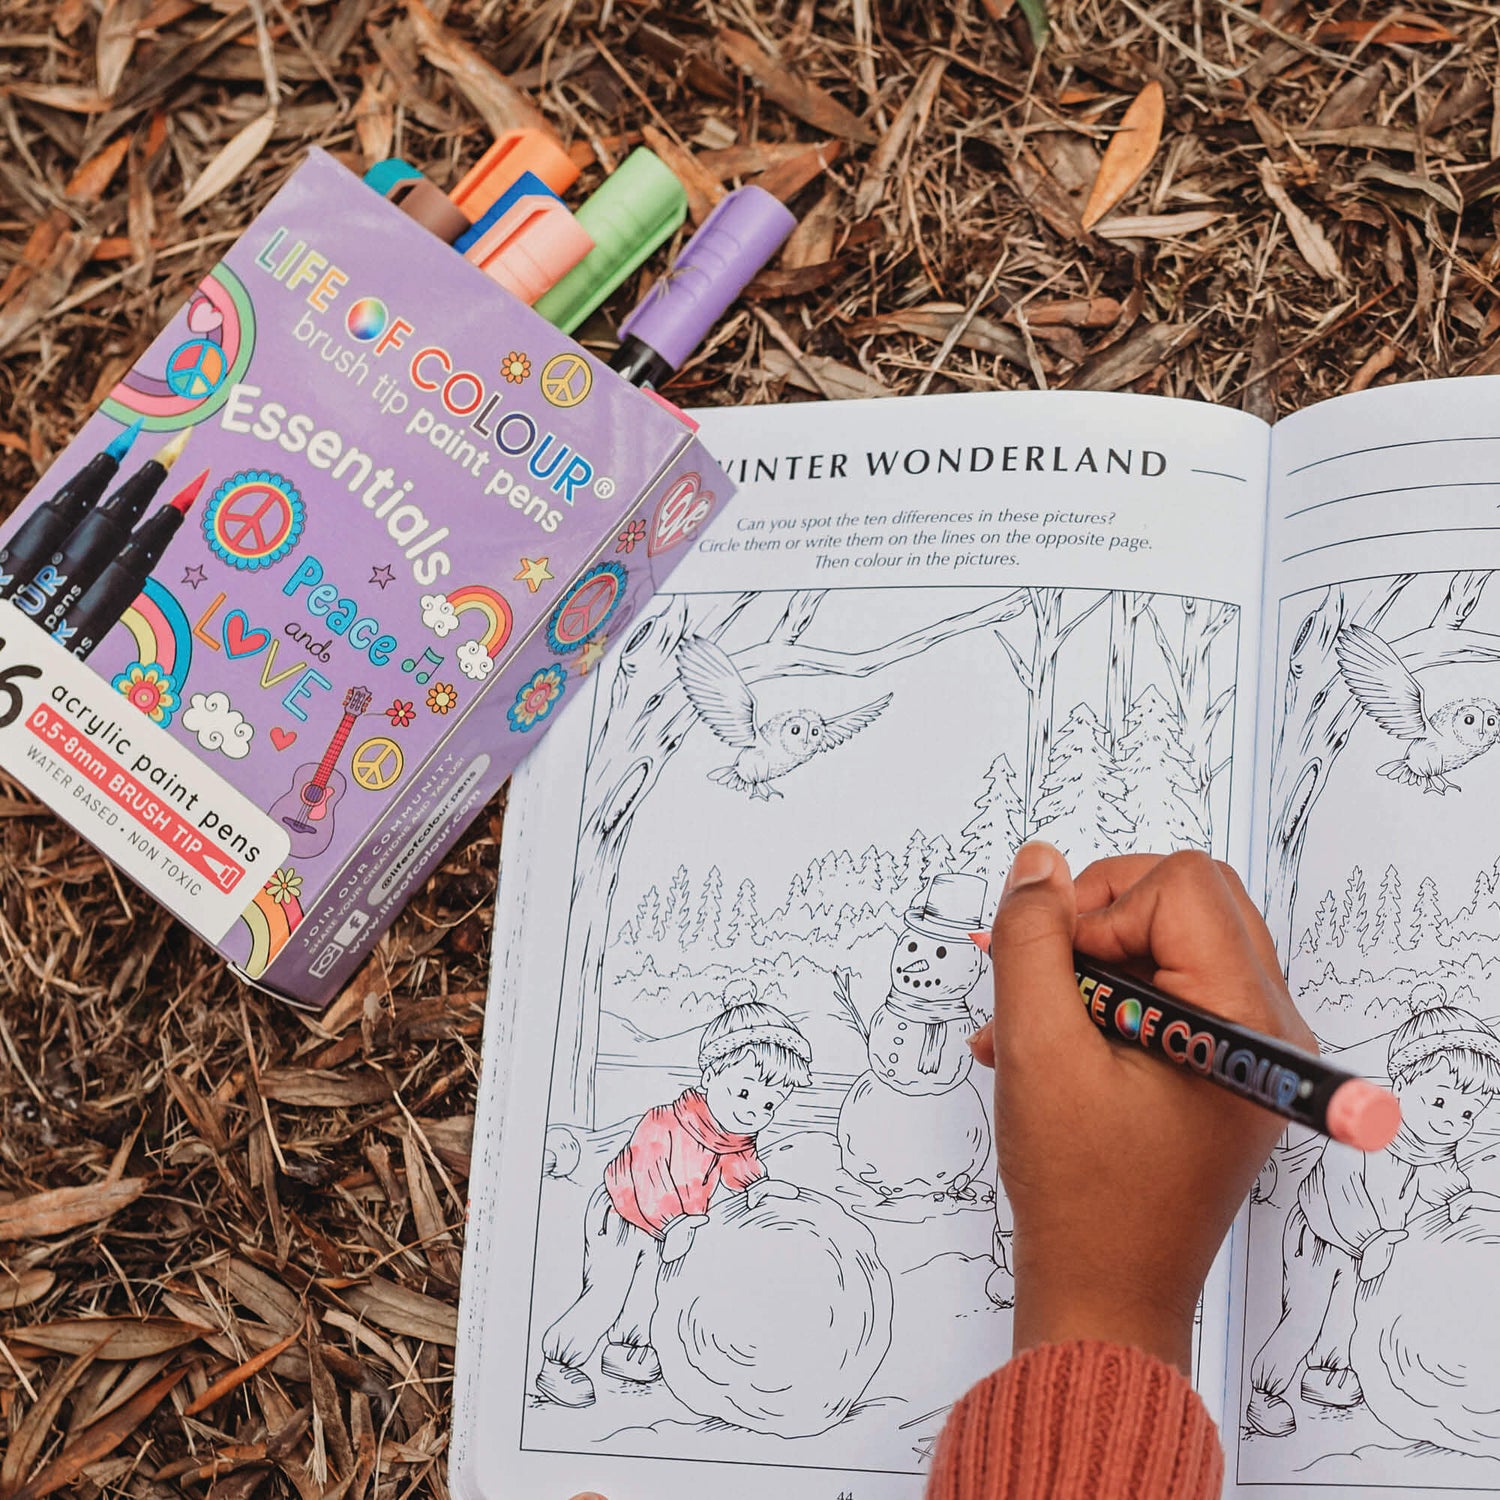 Girl drawing in activity book from Your Wild Books using Brush tip paint pens by Life of Colour.